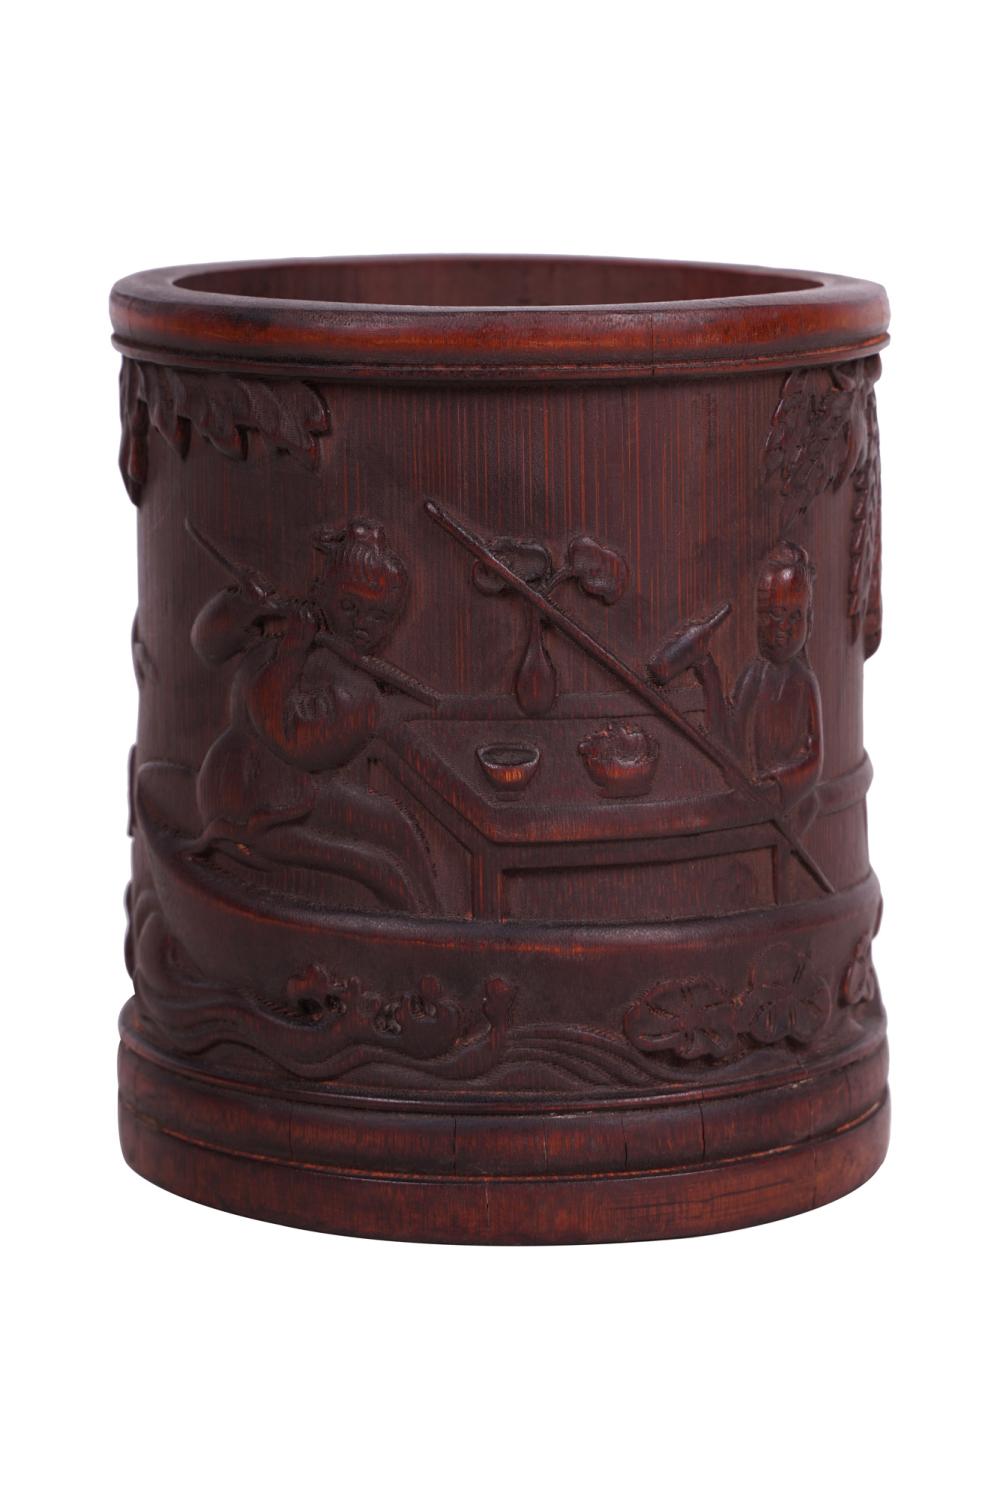 CHINESE CARVED WOOD BRUSH POT5